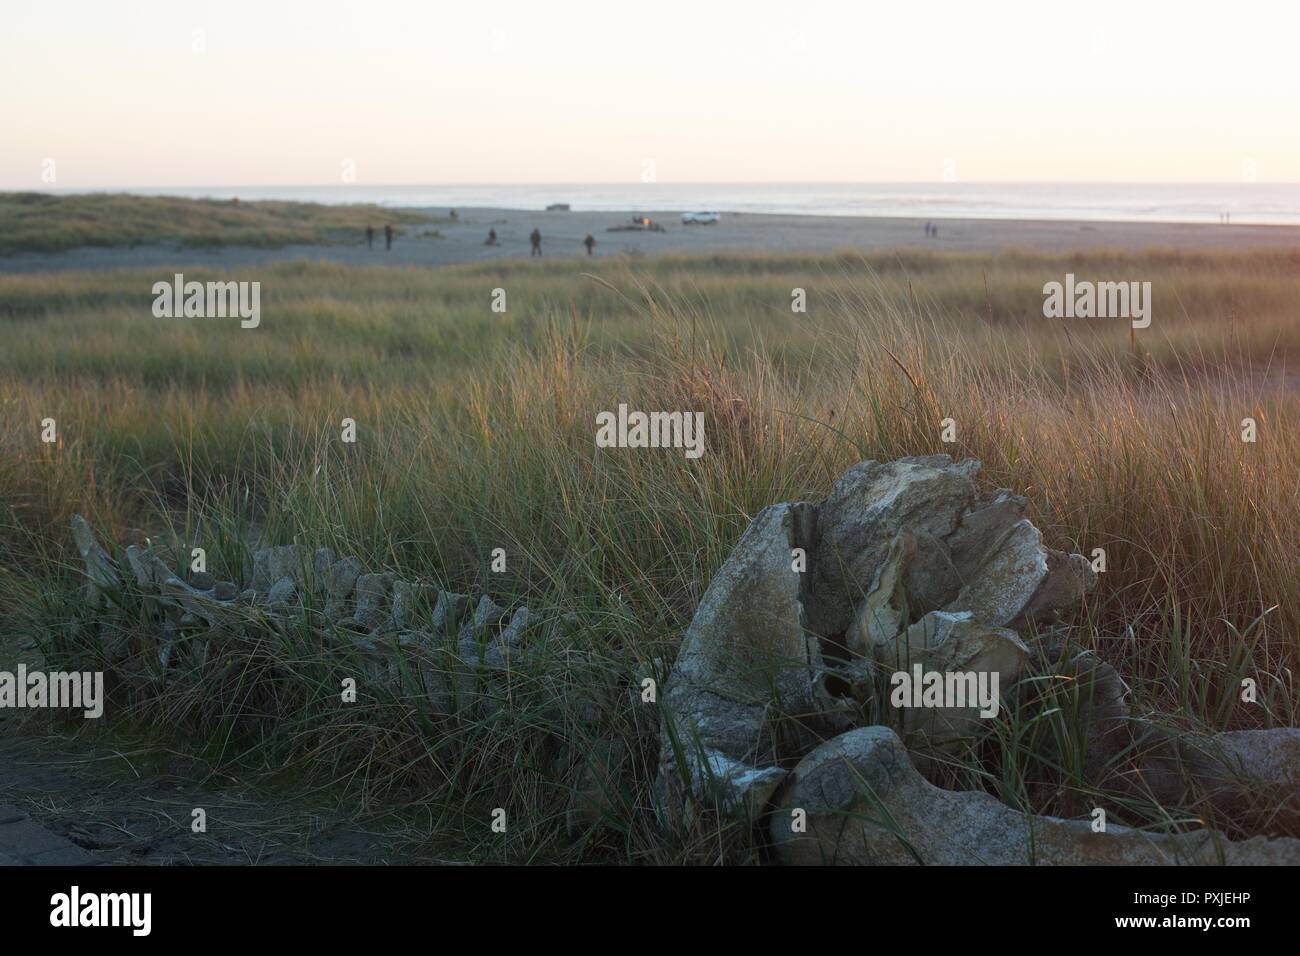 Real whale bones washed up and displayed on the Discovery Trail at Long Beach, Washington, USA. Stock Photo